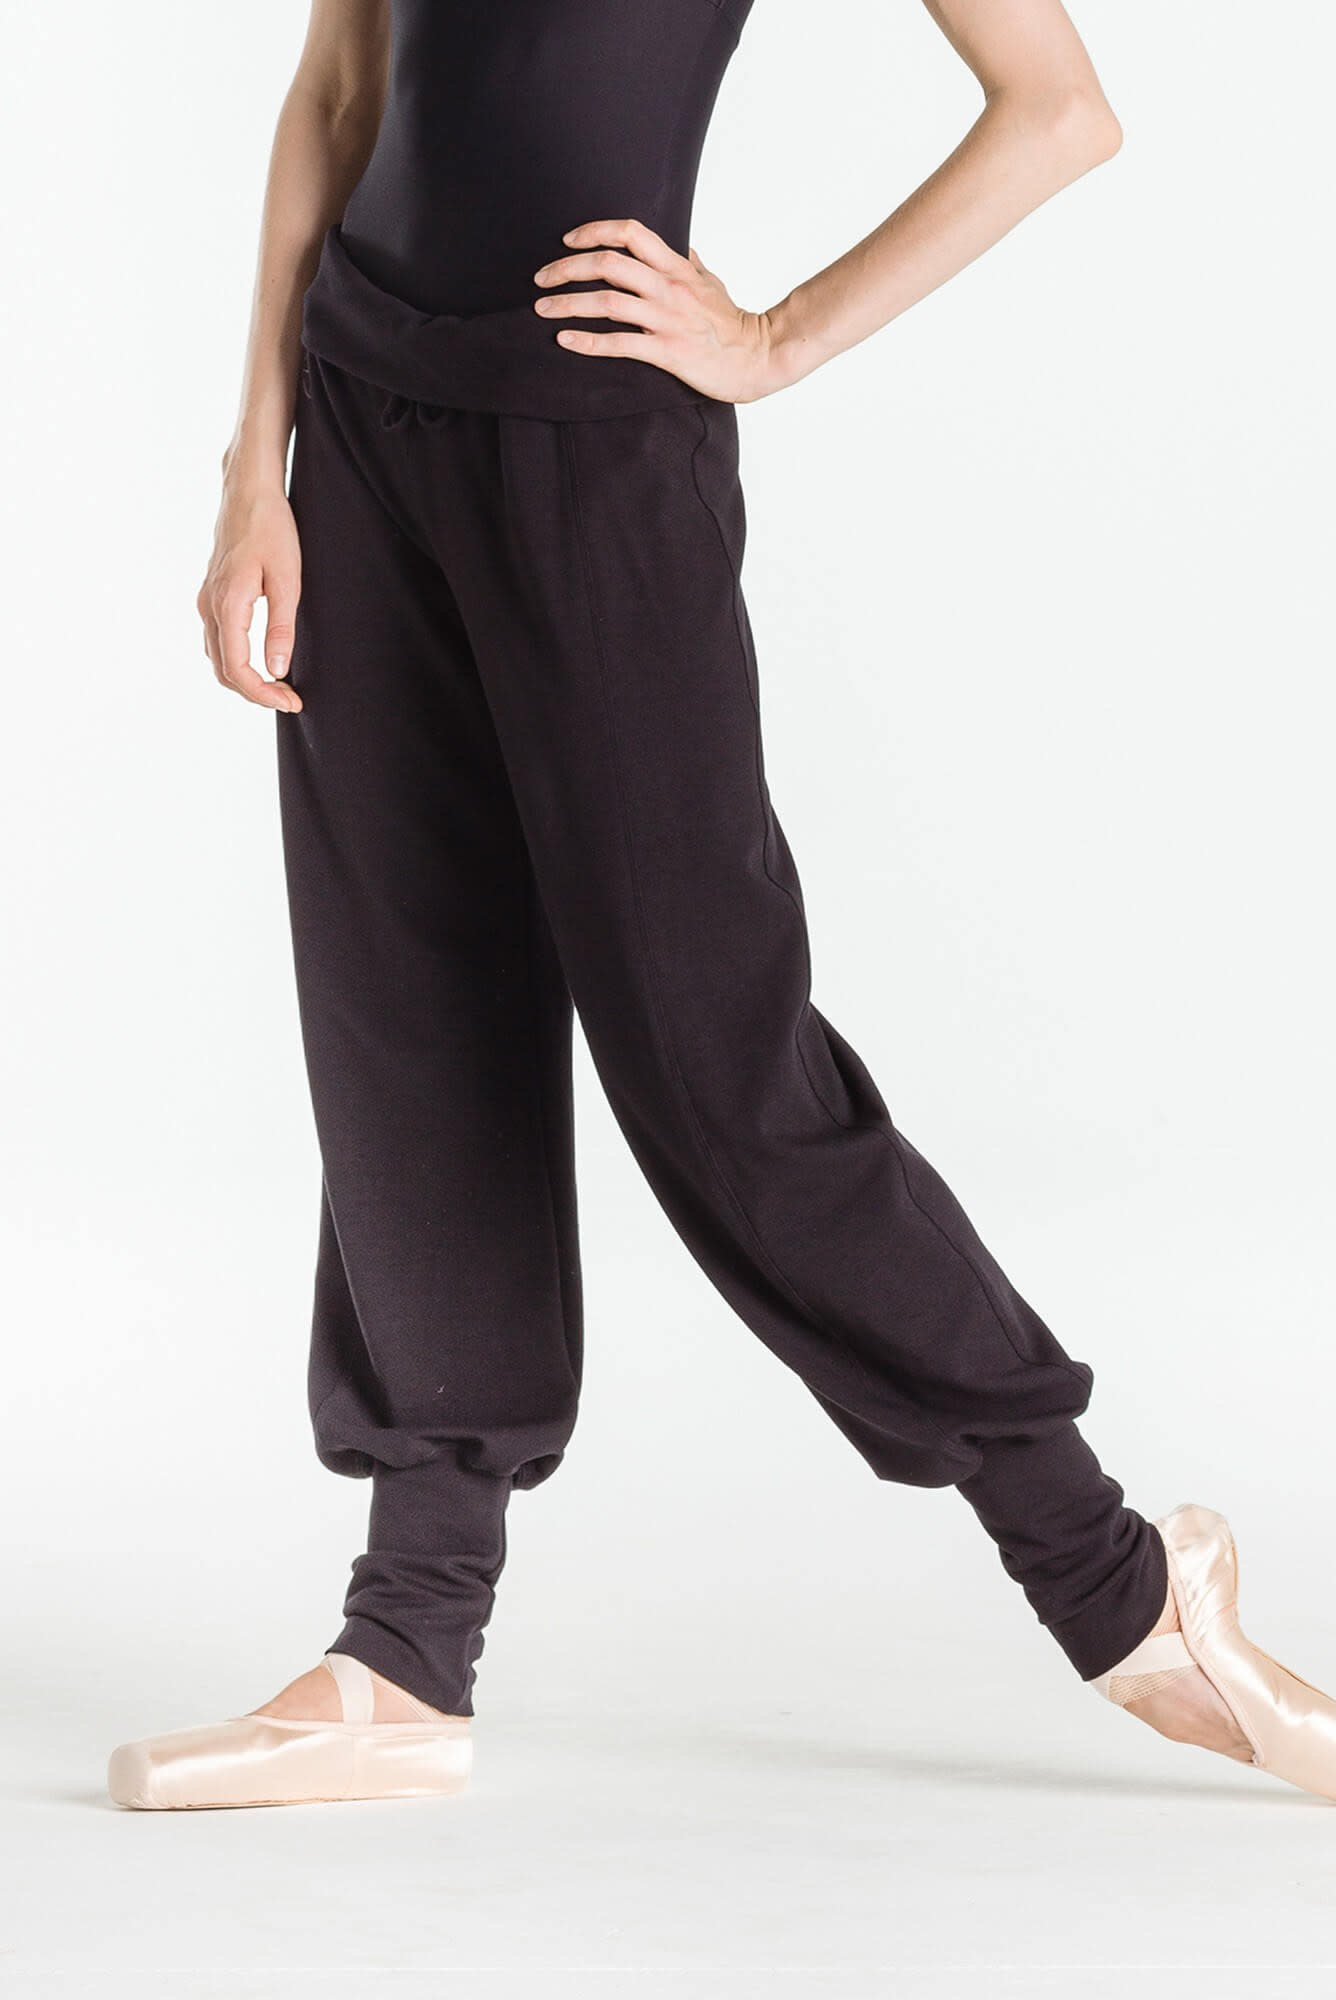 Wear Moi OPUS-Warm-Up Pants With Fitted Ankle